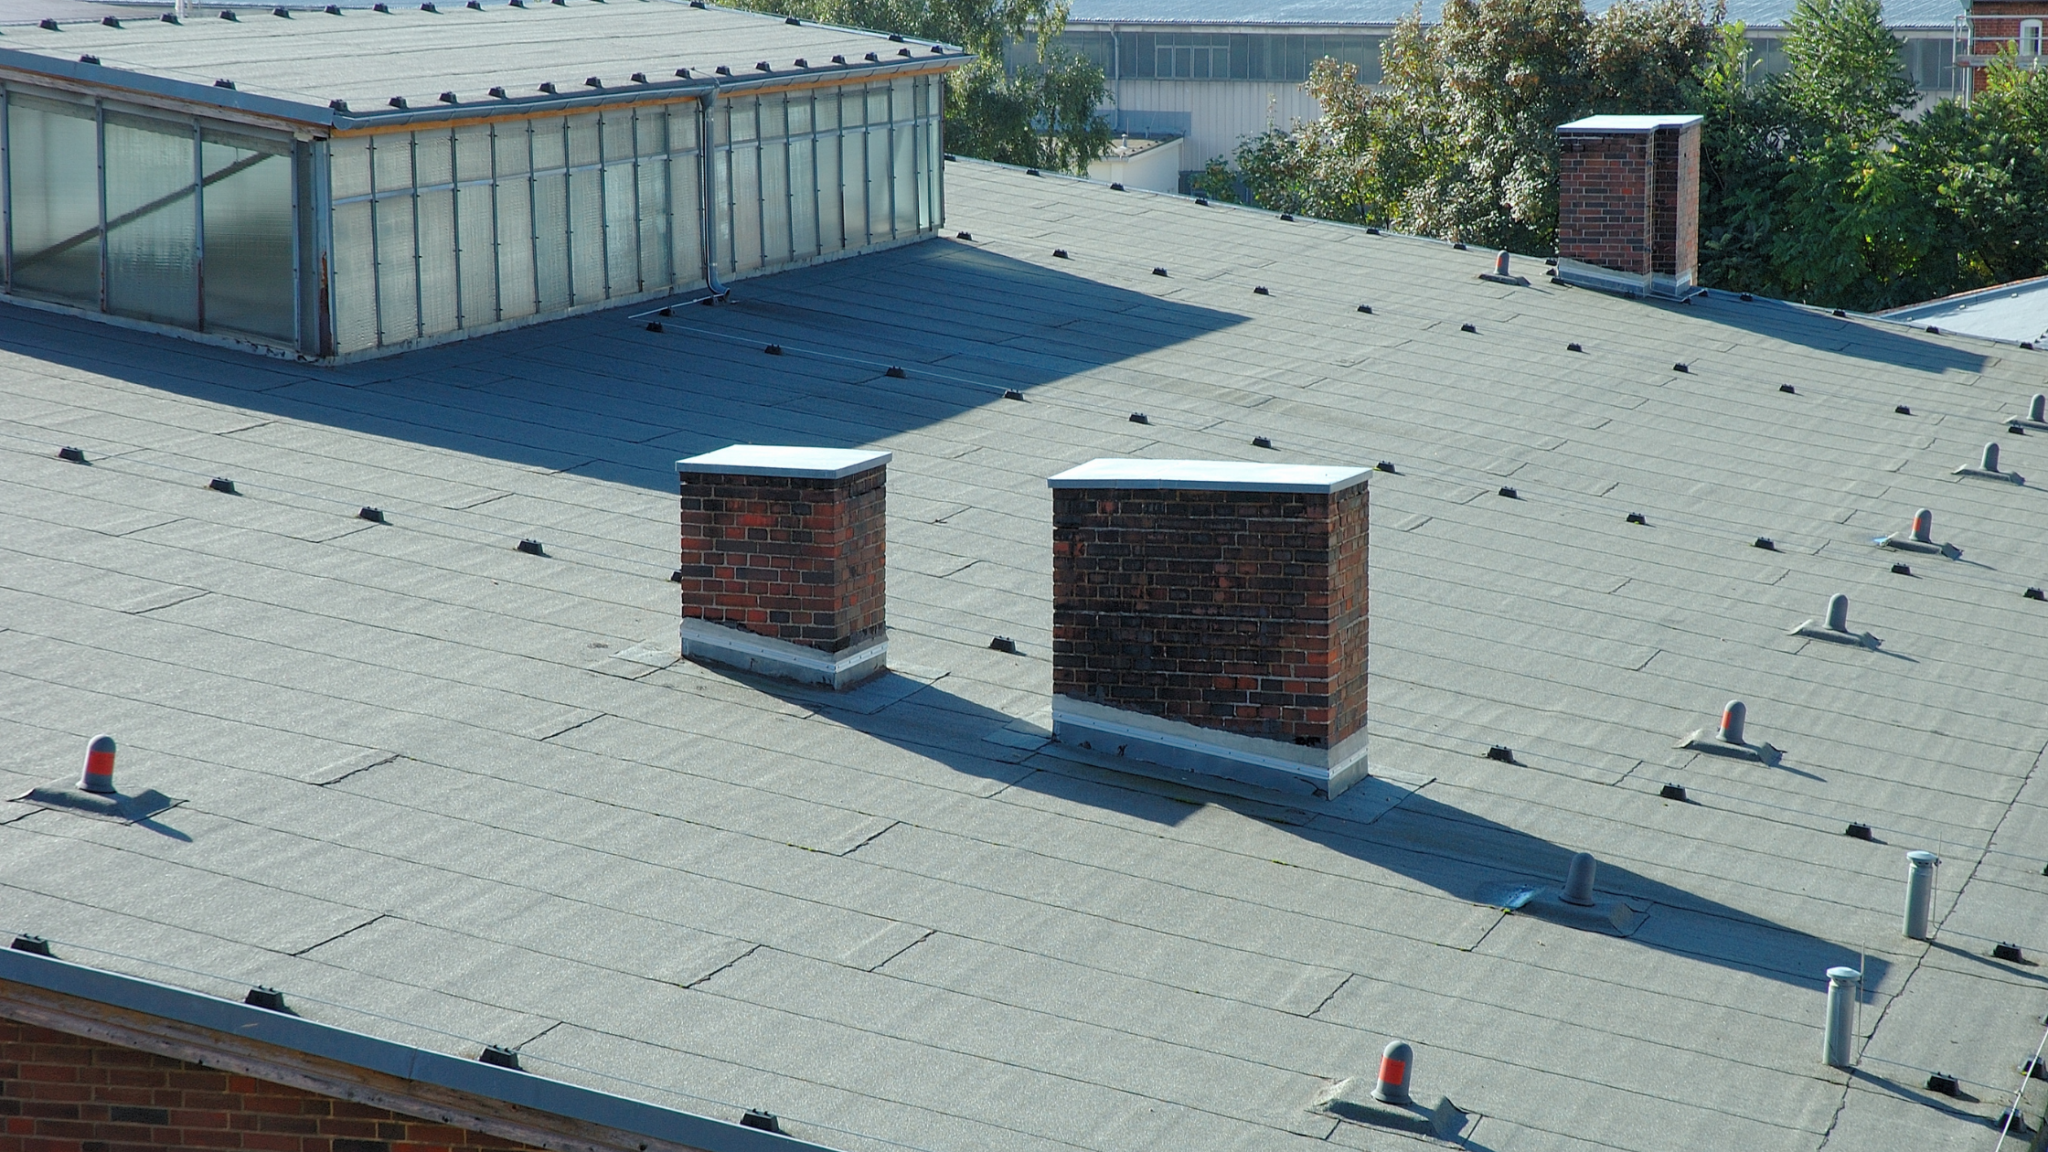 Importance of Hiring a Professional Commercial Roofing Company for Chimneys, Skylights, and Vent Openings